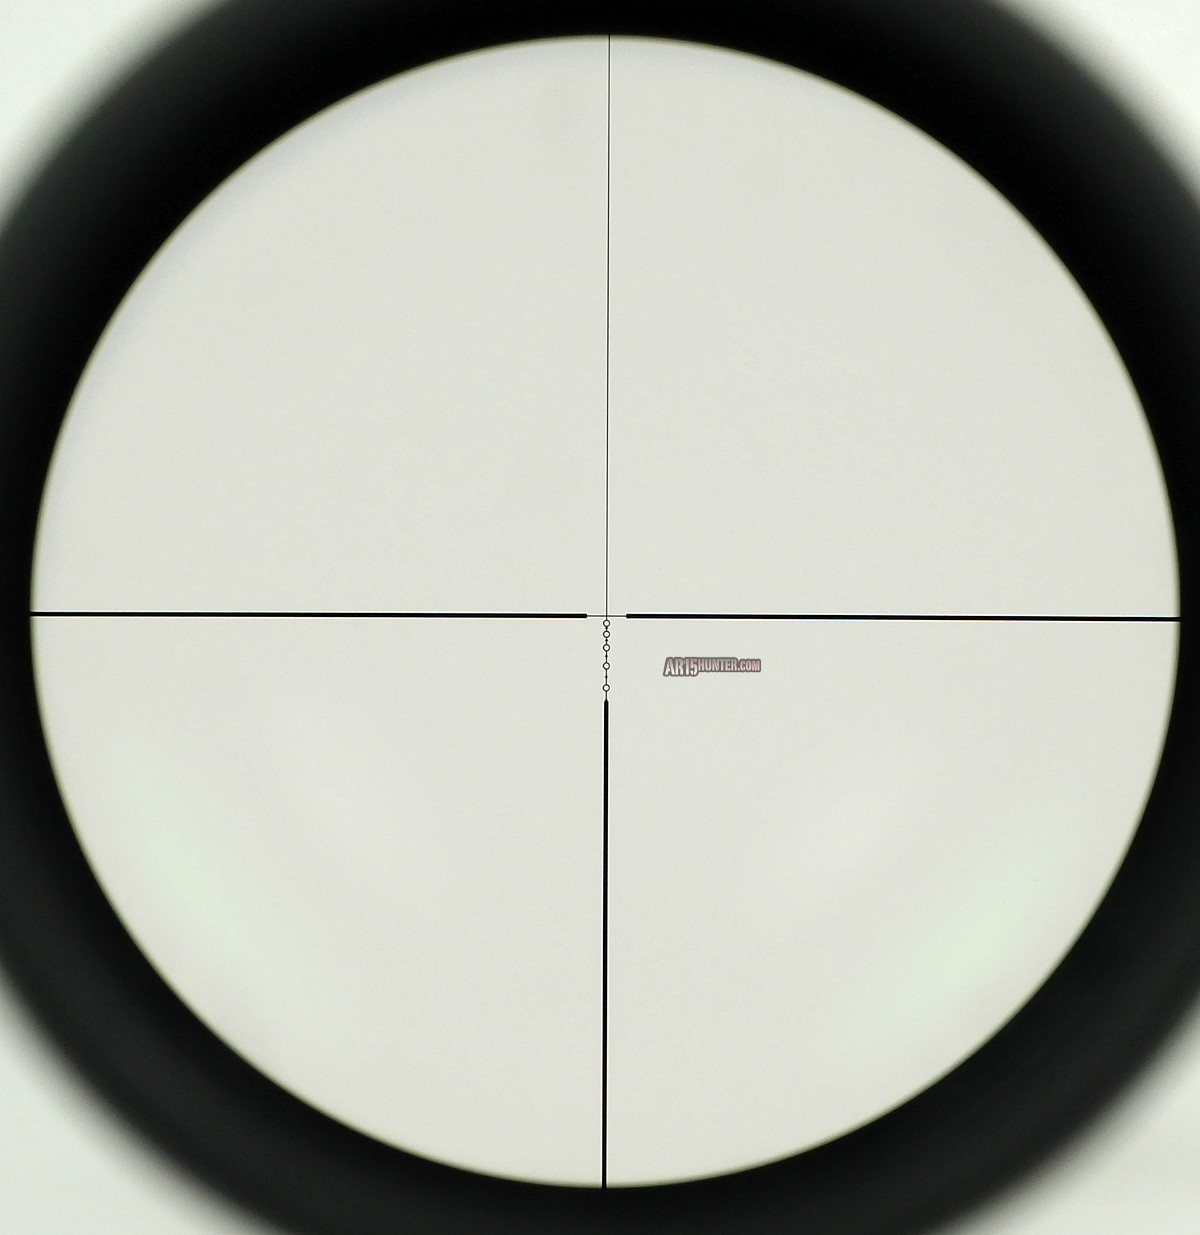 Reticles on inspect not working (Colliminators scopes etc